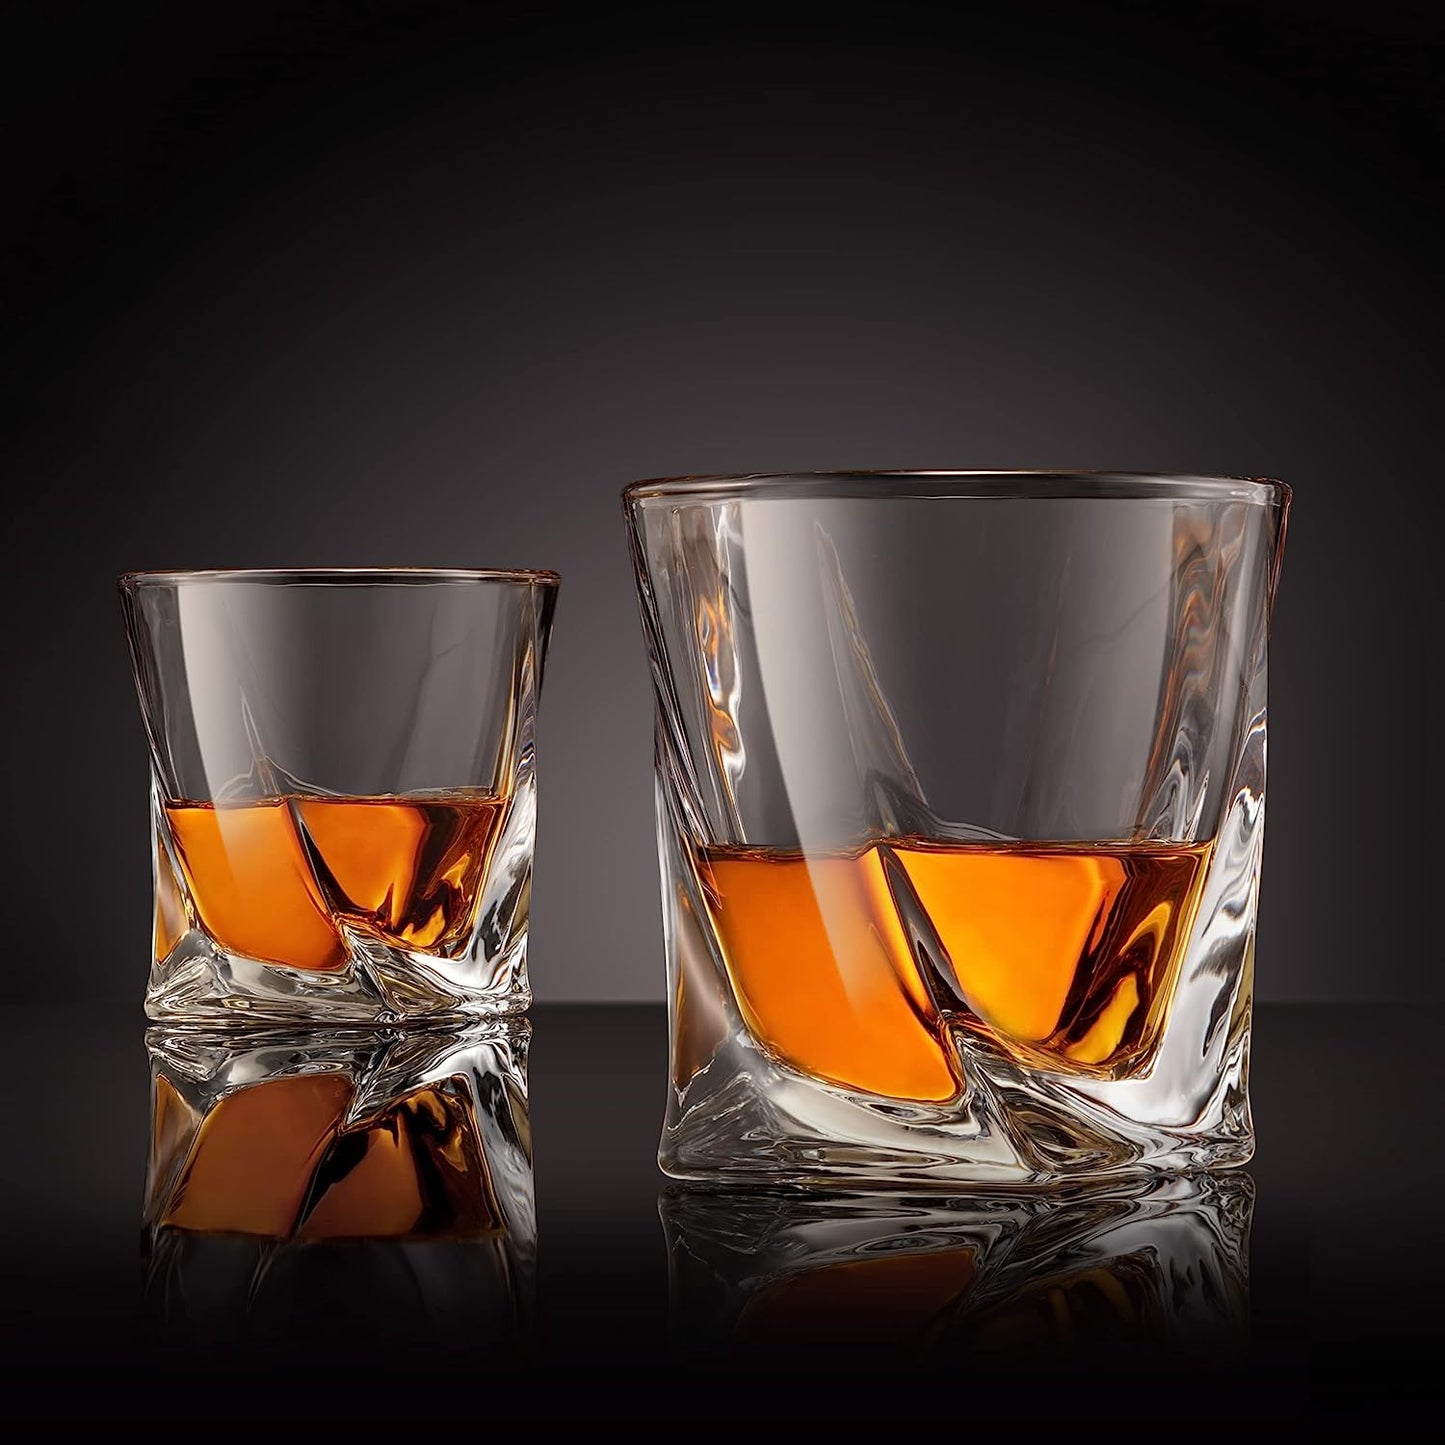 VENERO Crystal Whiskey Glasses, Set of 4 Rocks Glasses in Satin-Lined Gift Box - 10 oz Old Fashioned Lowball Bar Tumblers for Drinking Bourbon, Scotch Whisky, Cocktails, Cognac